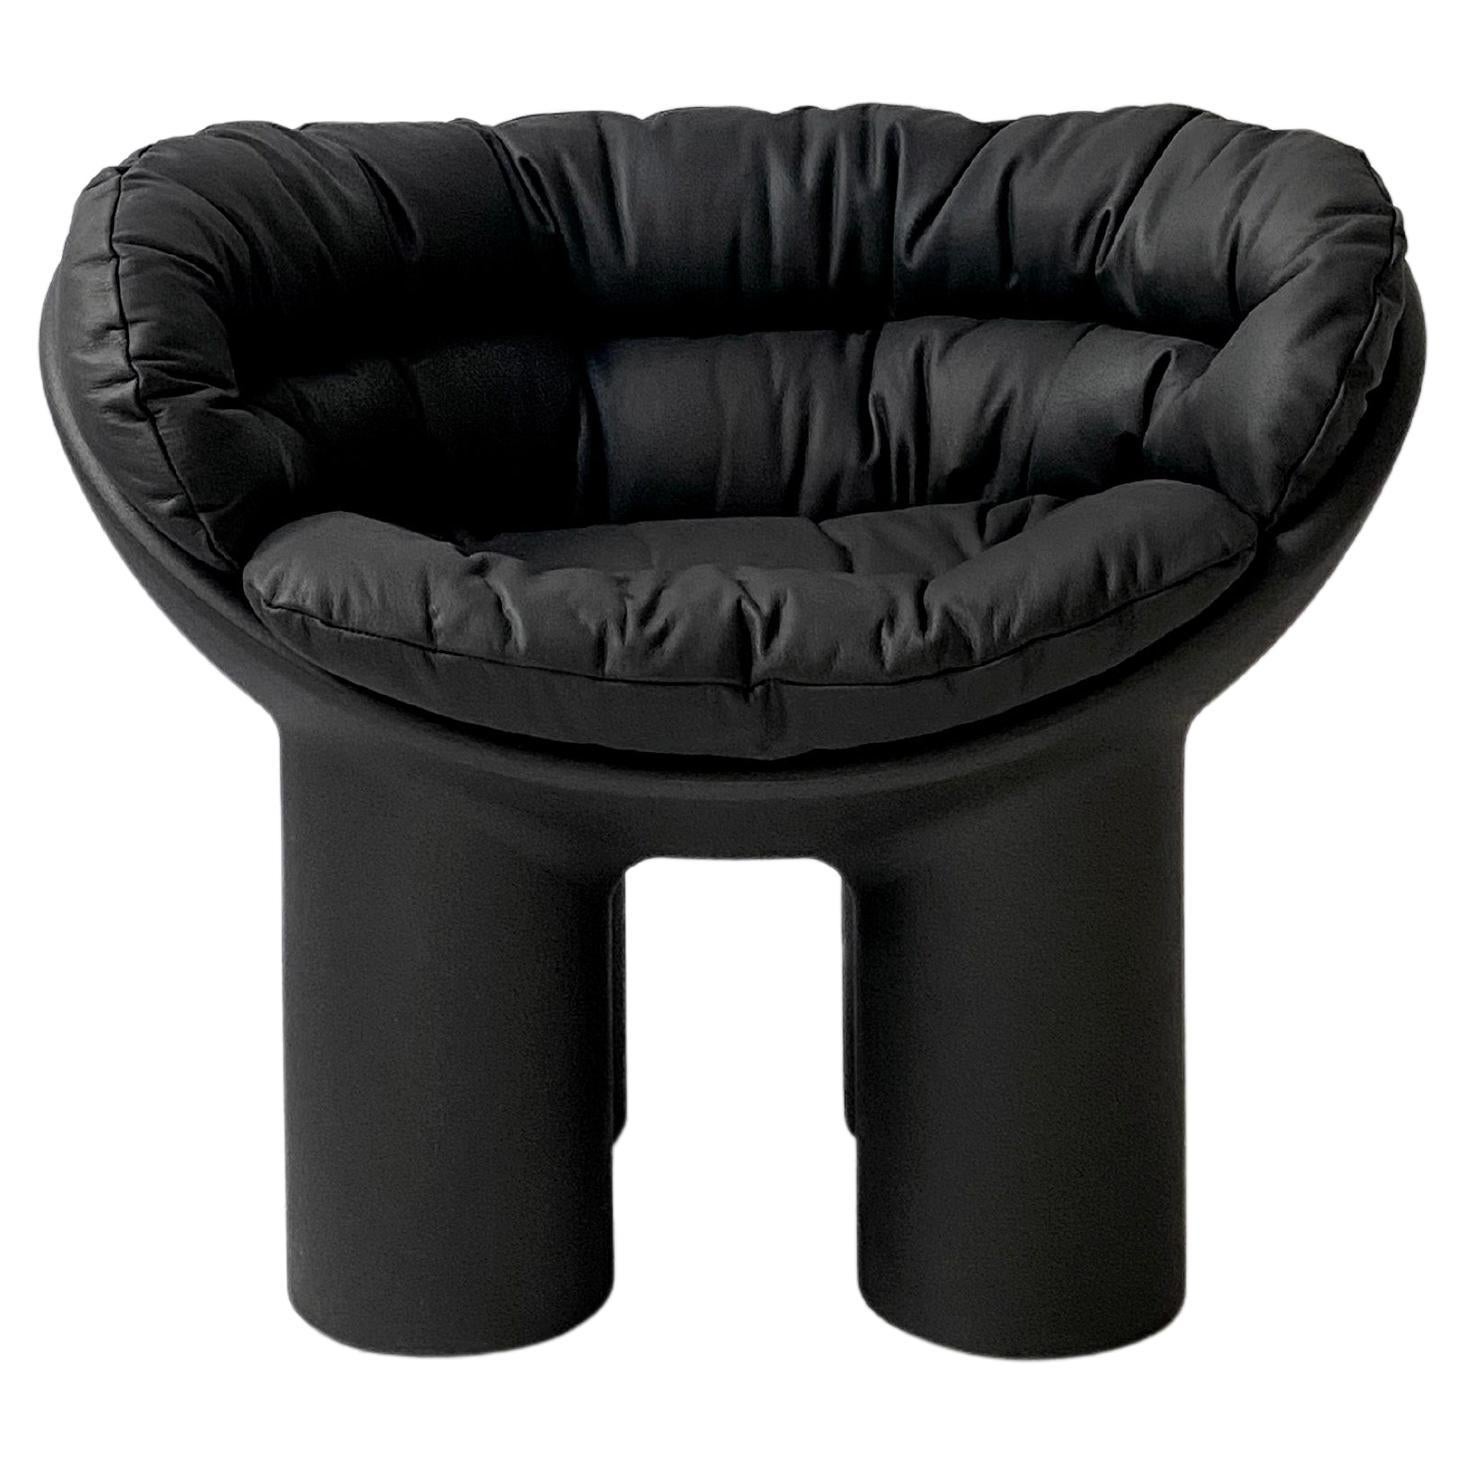 Roly Poly Armchair in Black by Faye Toogood with Aniline Leather cushions For Sale